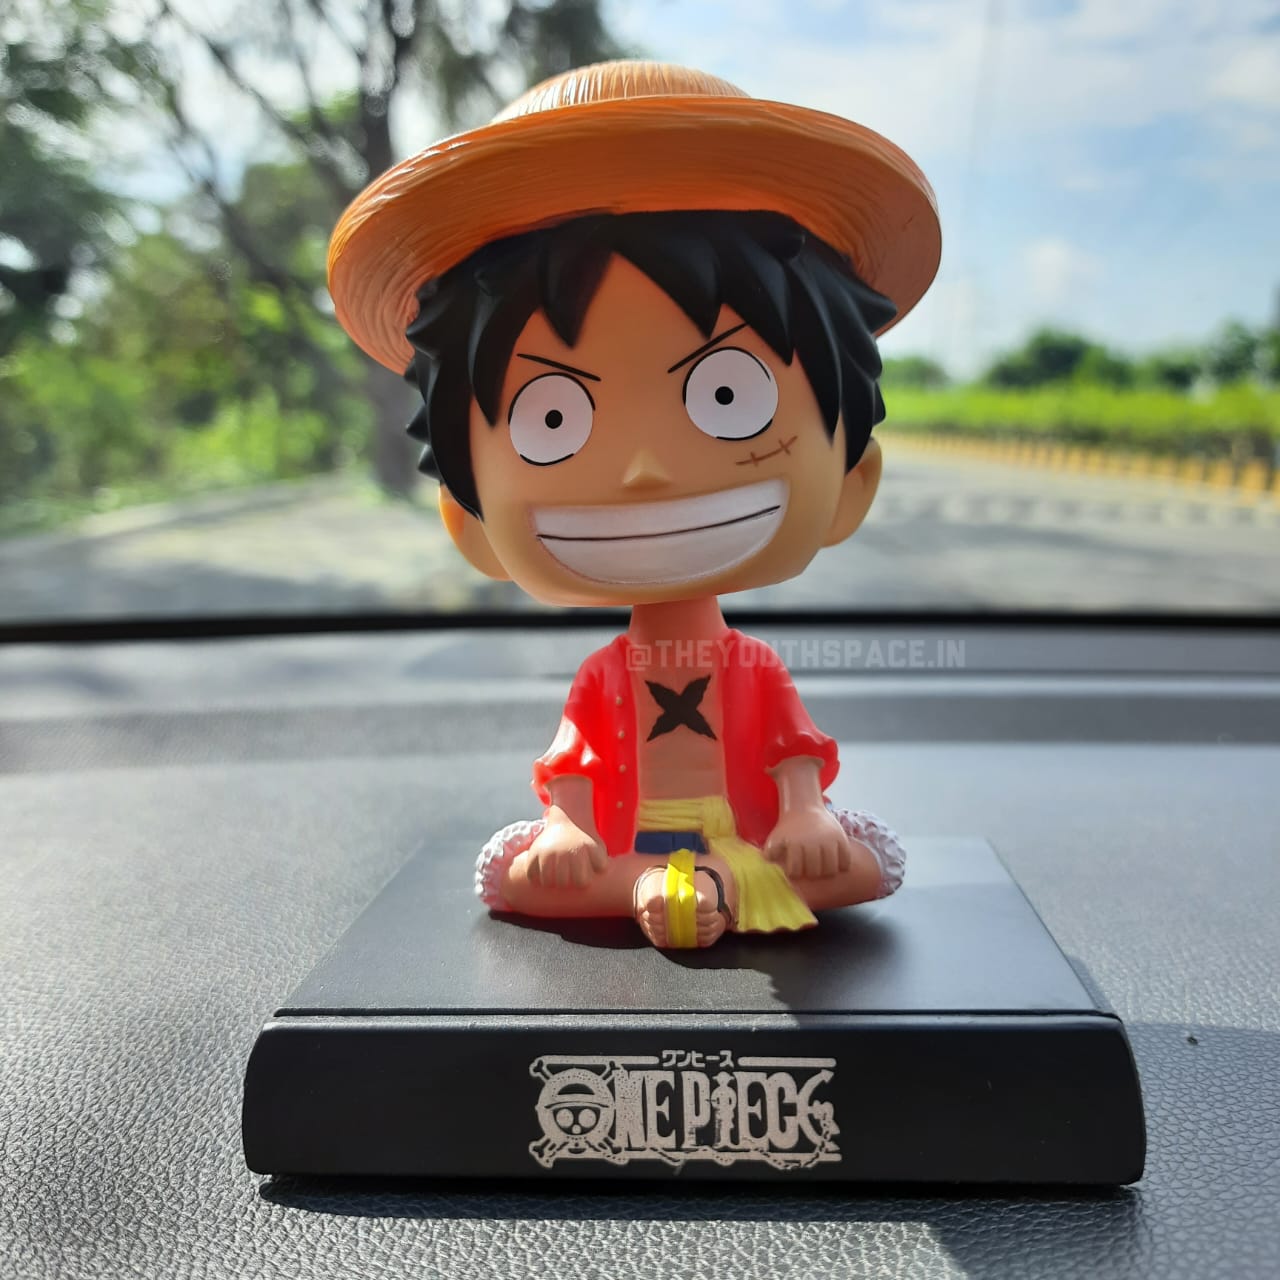 SABIRAT Famous Anime Bobblehead Figure Toys With Mobile Holder [Multi  Character] - Famous Anime Bobblehead Figure Toys With Mobile Holder [Multi  Character] . Buy Anime toys in India. shop for SABIRAT products